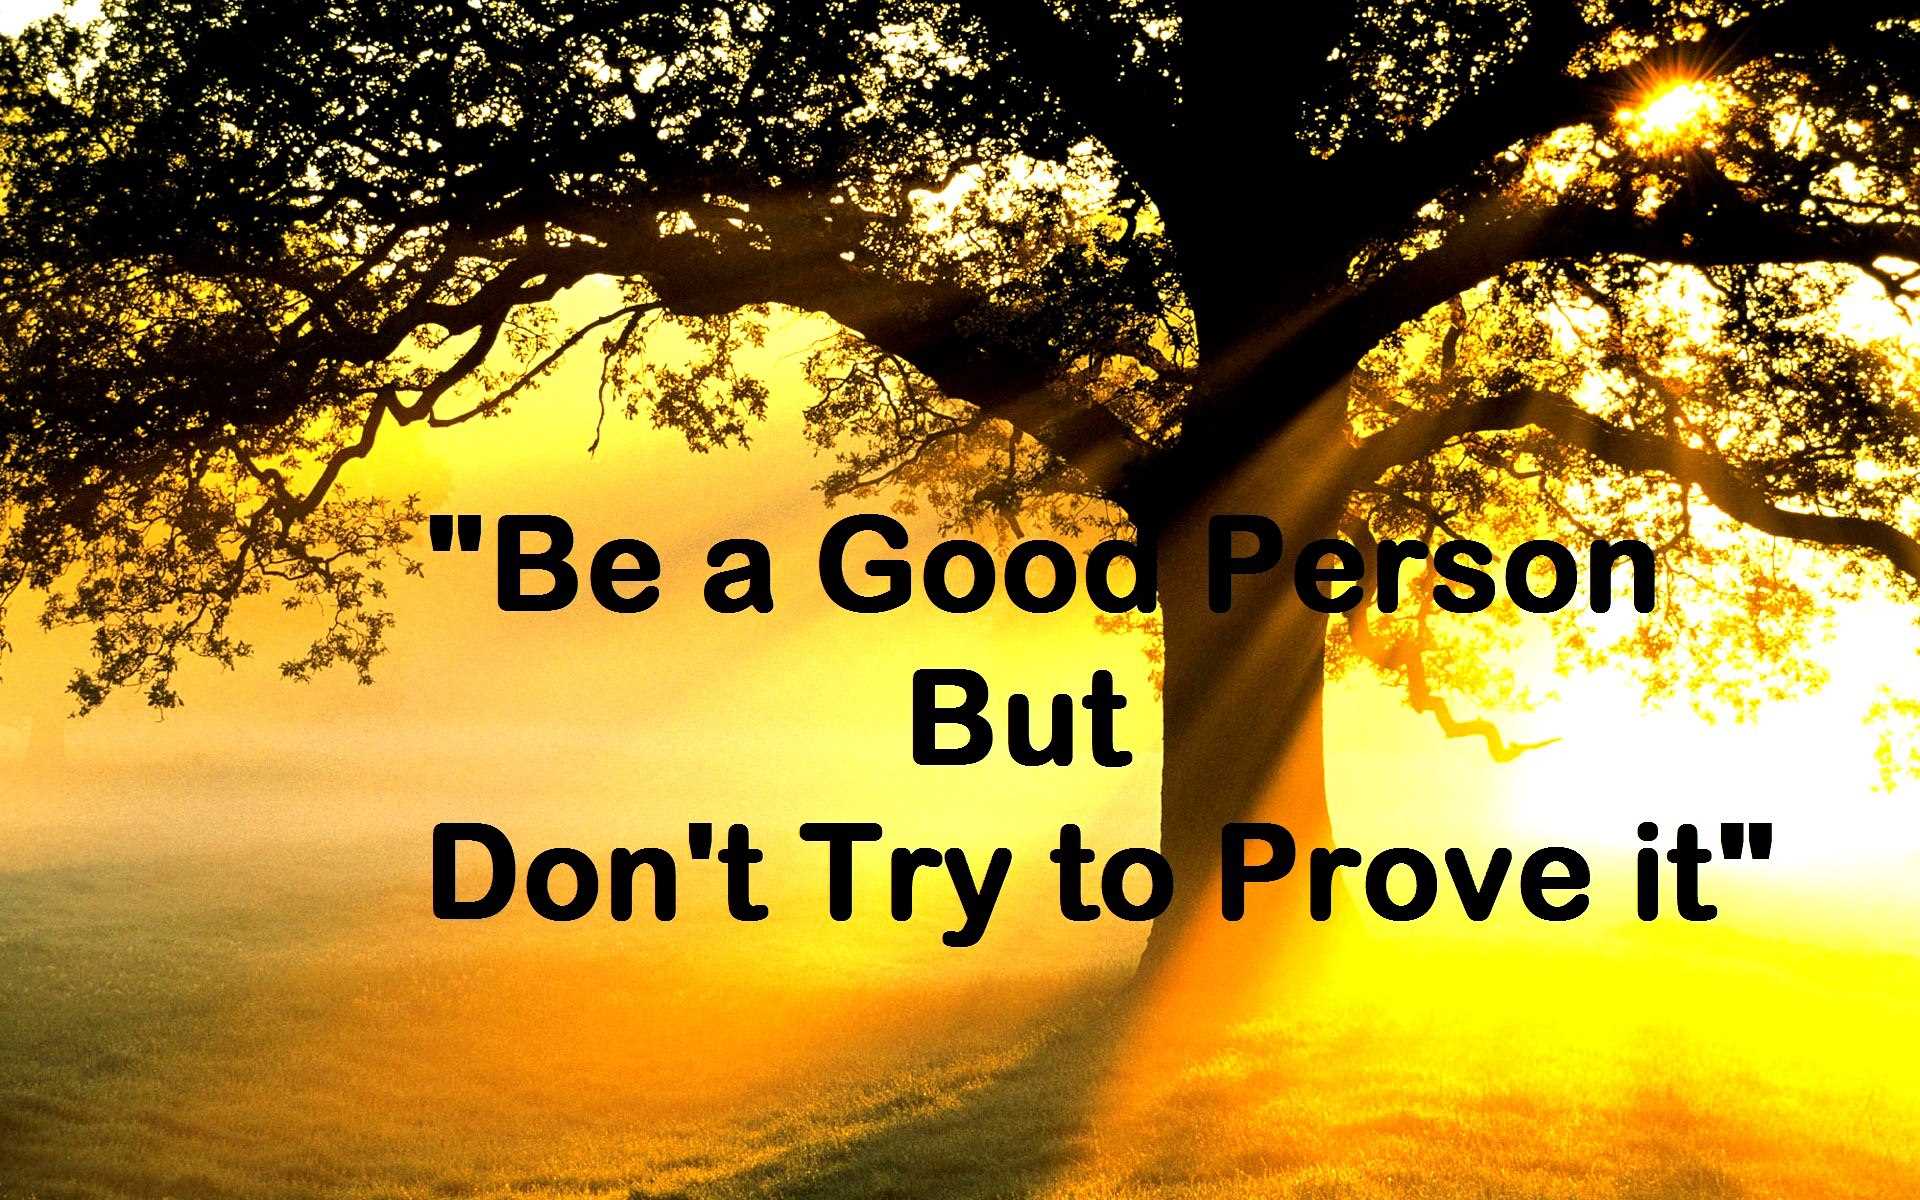 Be a good person but don’t try to prove it